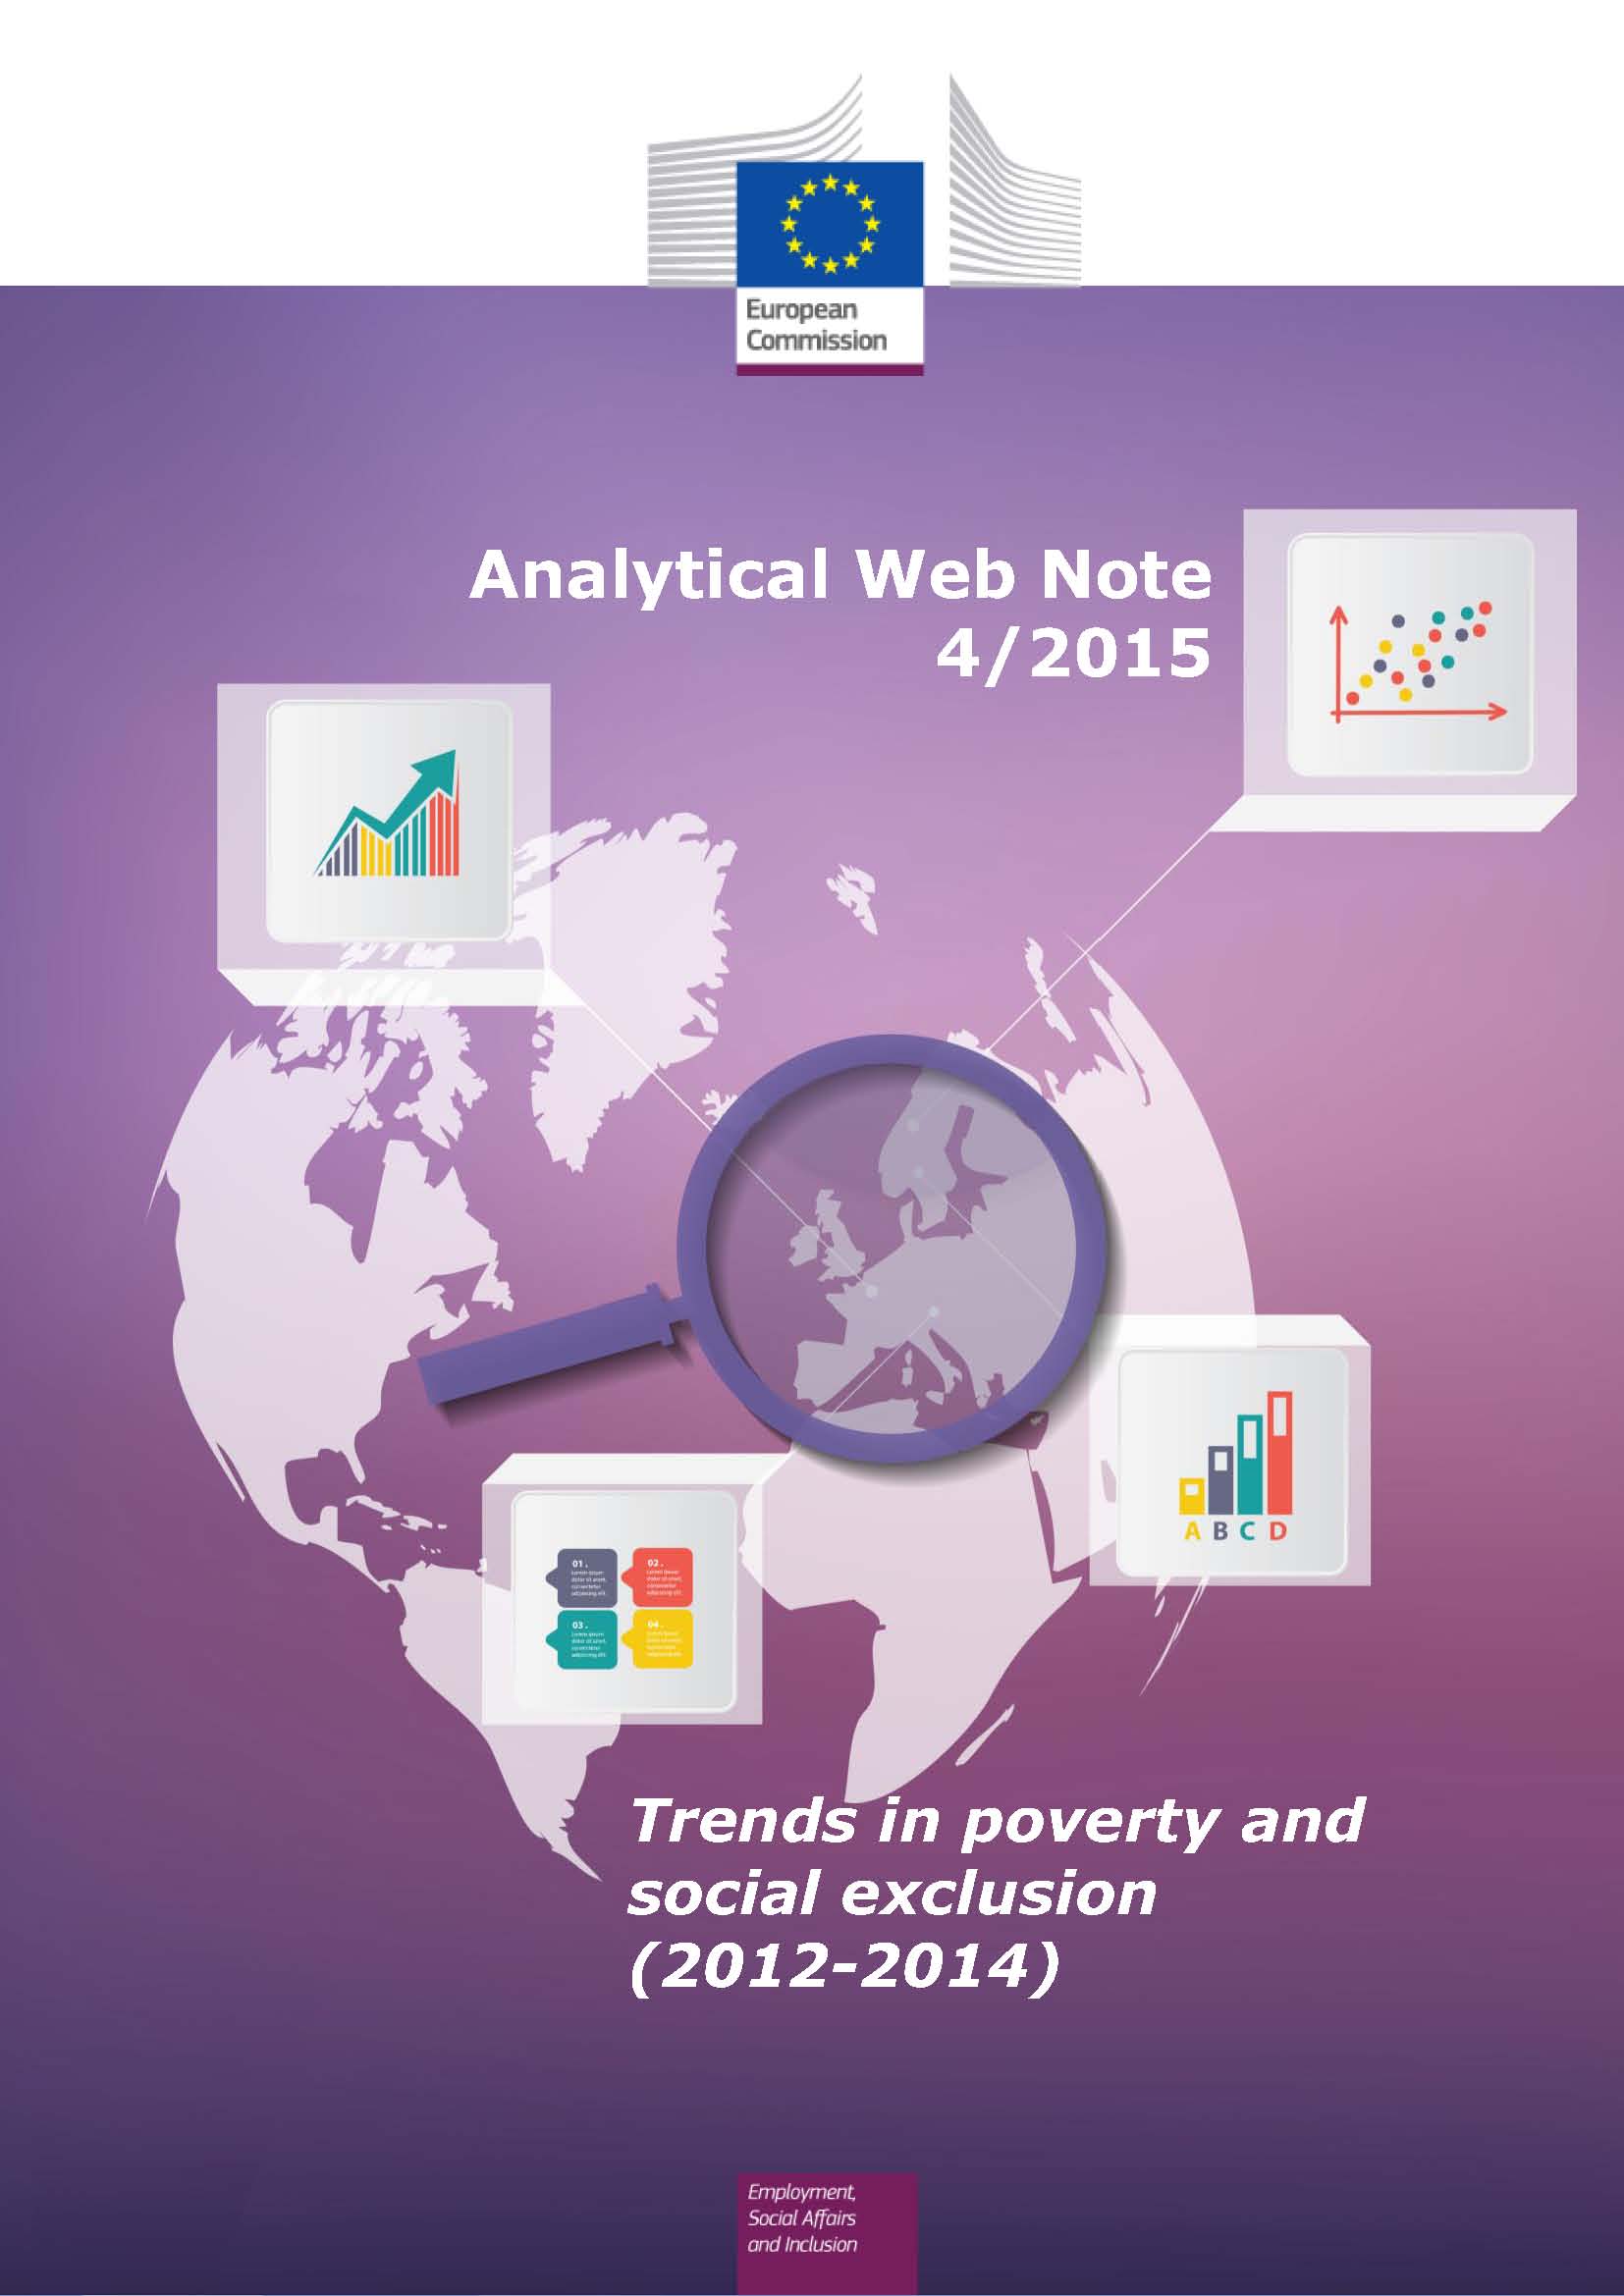 Analytical Web Note 4/2015 - Trends in poverty and social exclusion 2012-2014